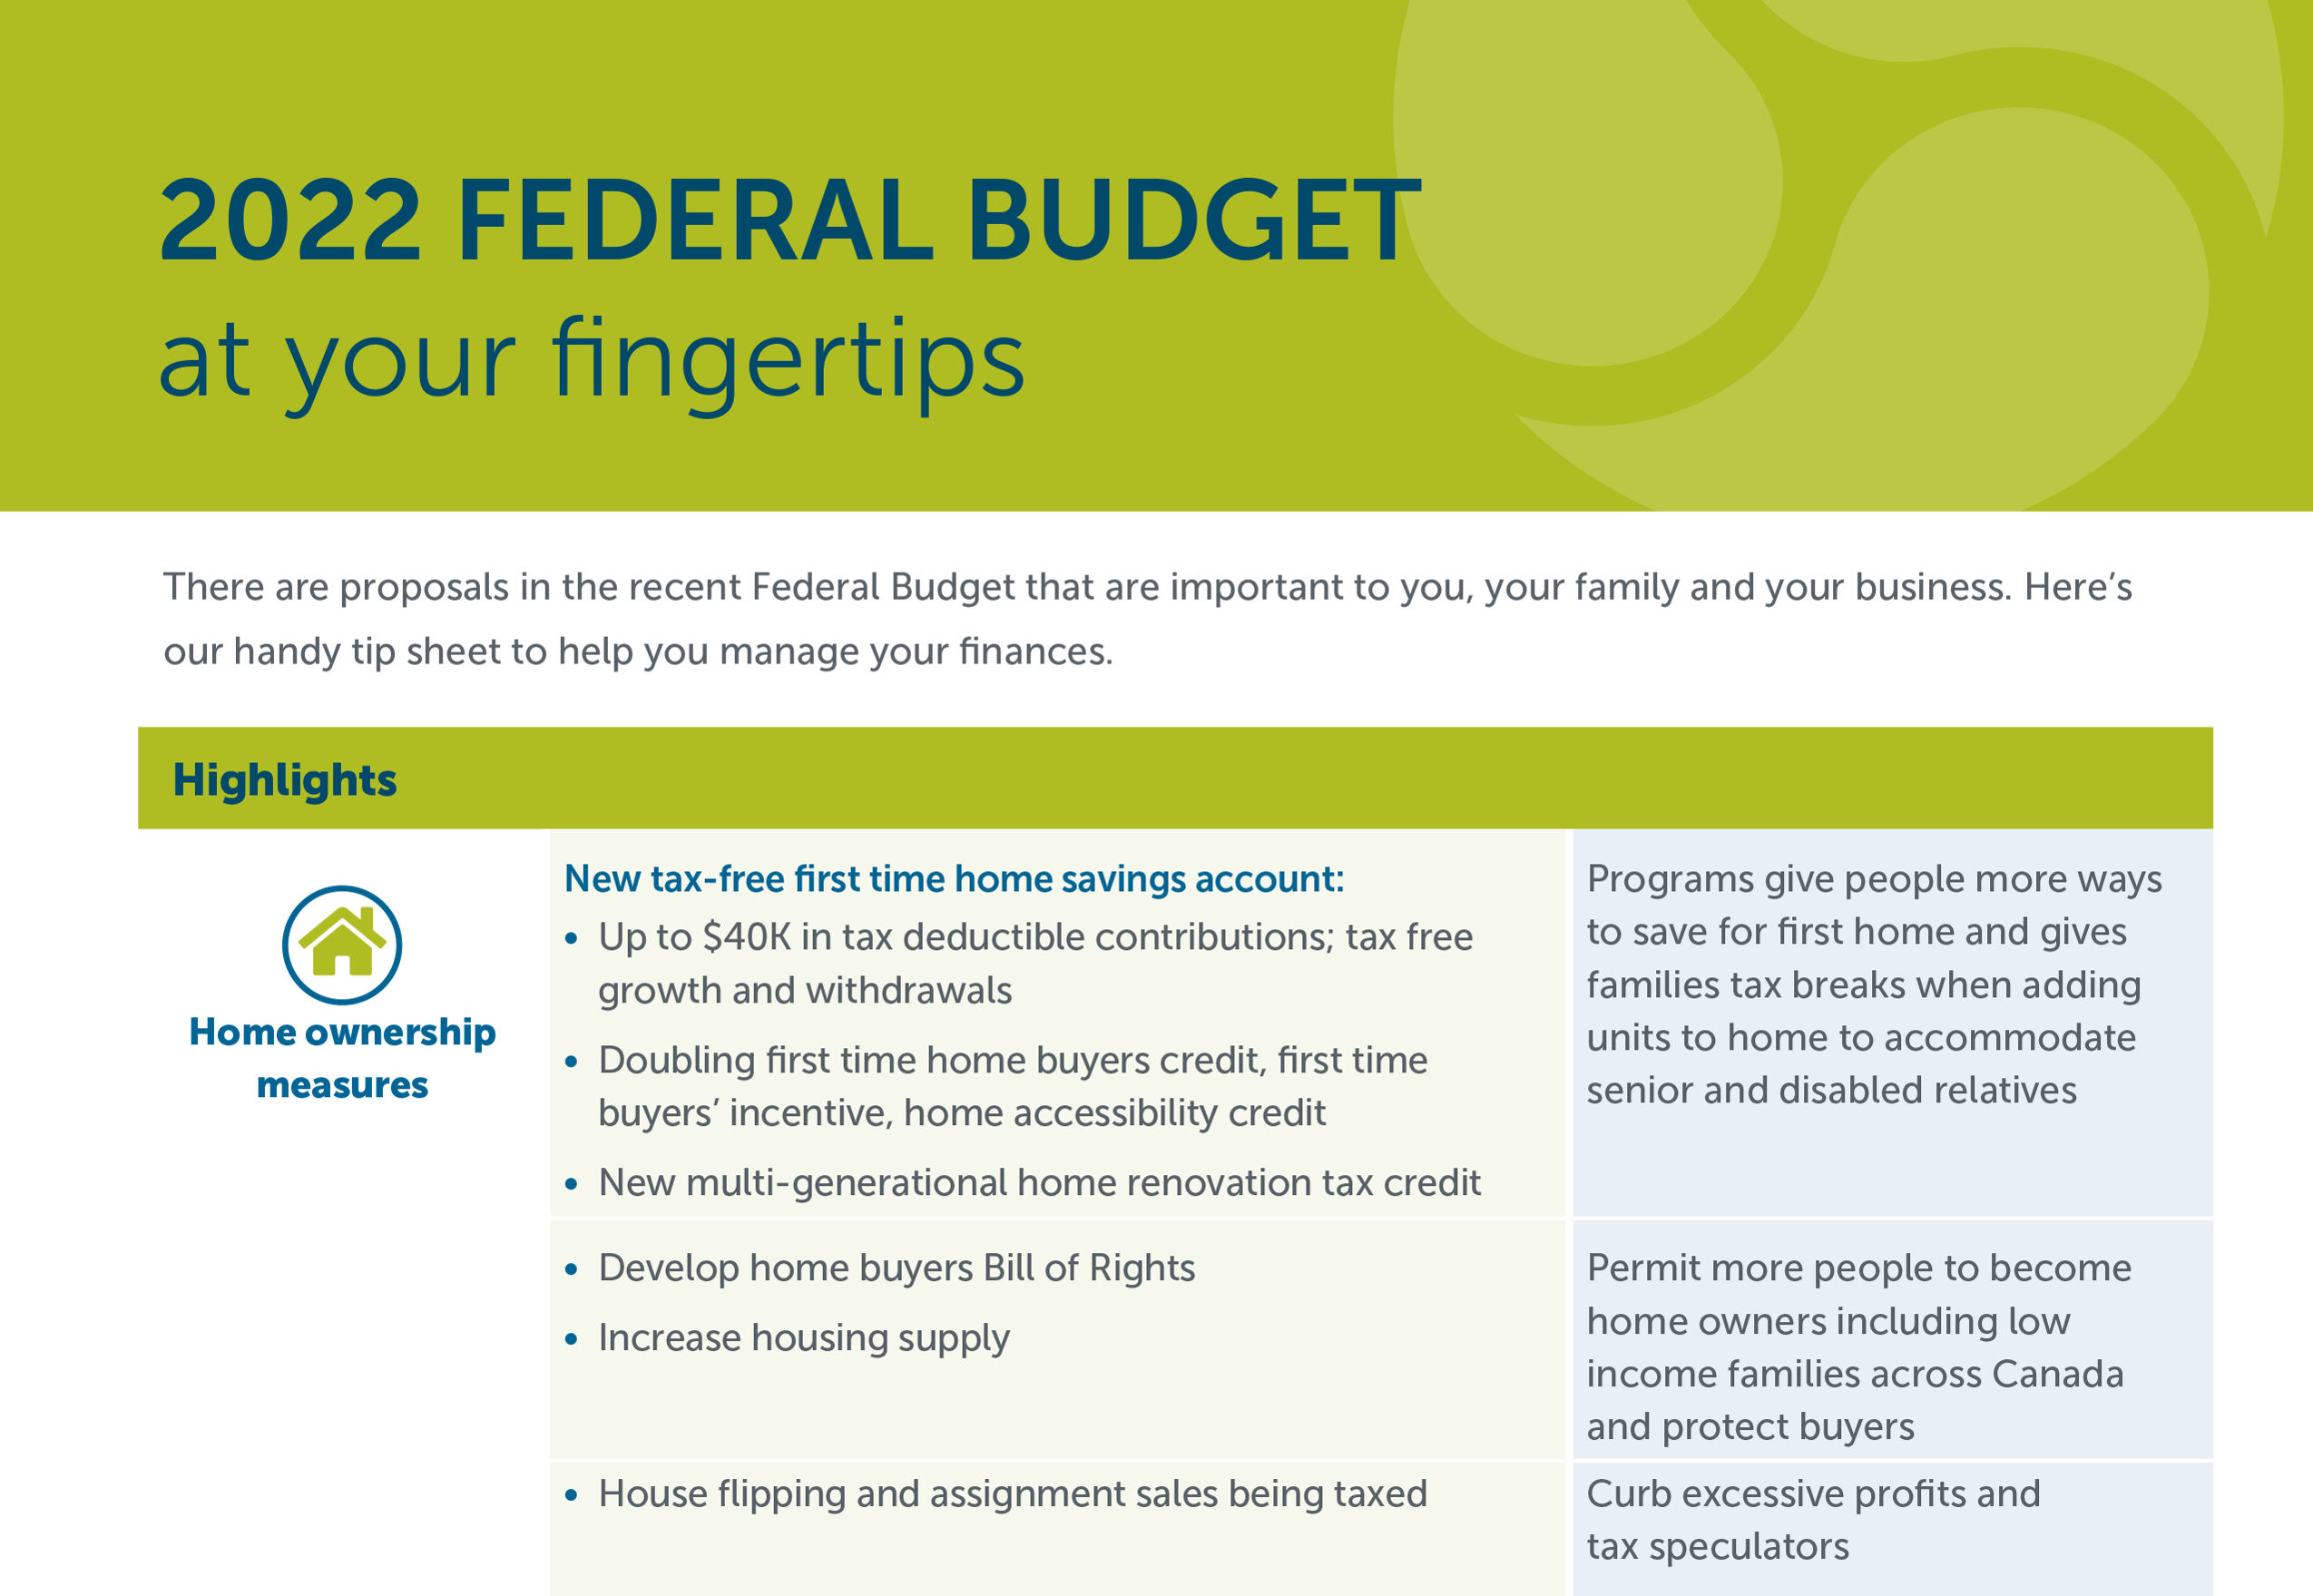 2022 Federal Budget @ your fingertips